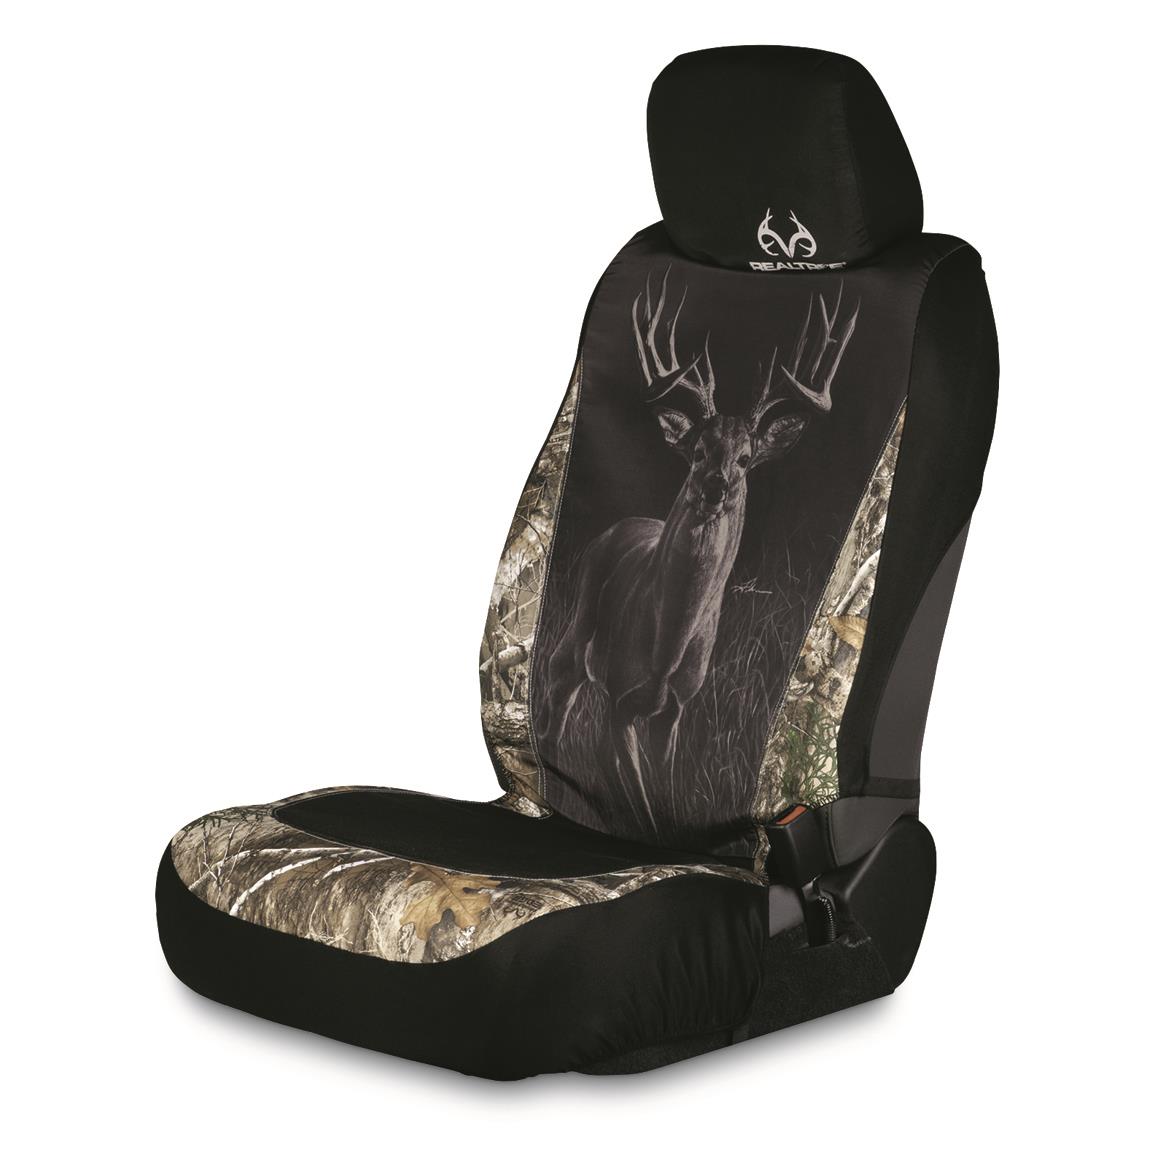 Browning Wildlife Low Back Seat Cover